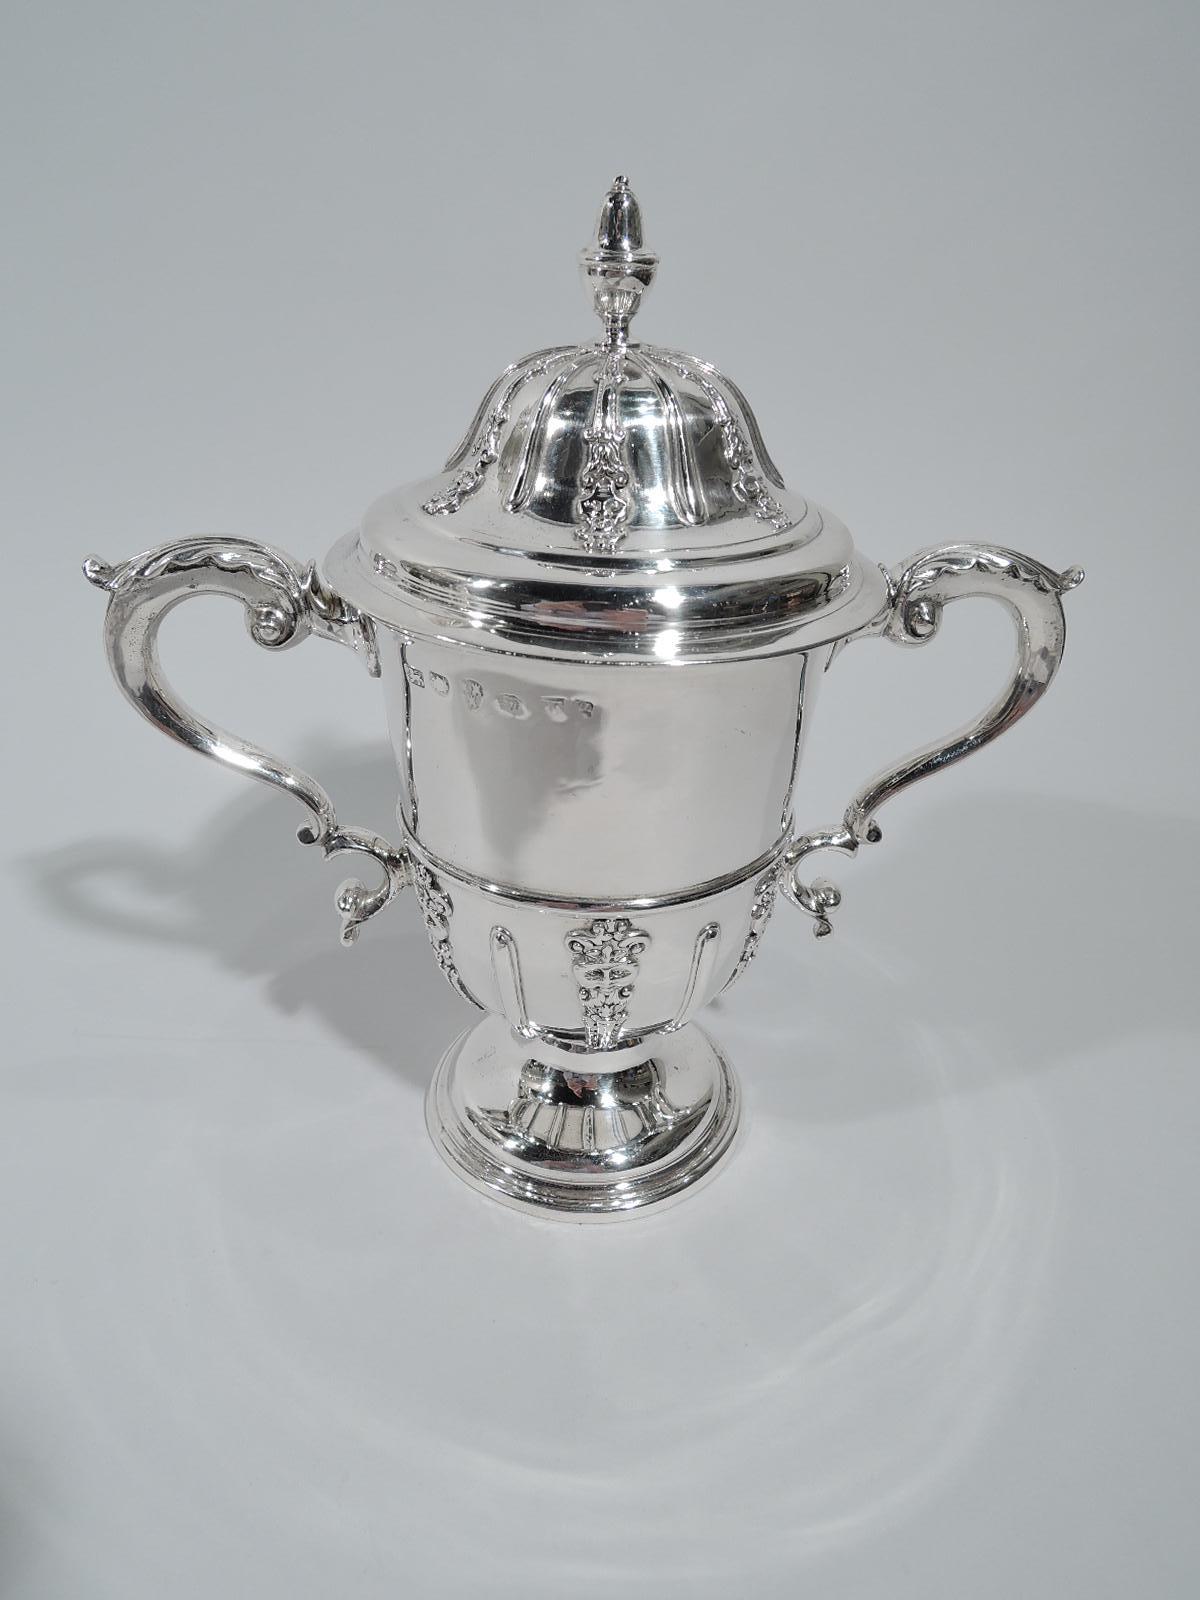 George II sterling silver covered urn. Made by John Langlands & John Robertson in Newcastle in 1739. Girdled with leaf-capped double-scroll sides handles and raised foot. Cover domed with acorn finial. Applied vertical strapwork alternating with